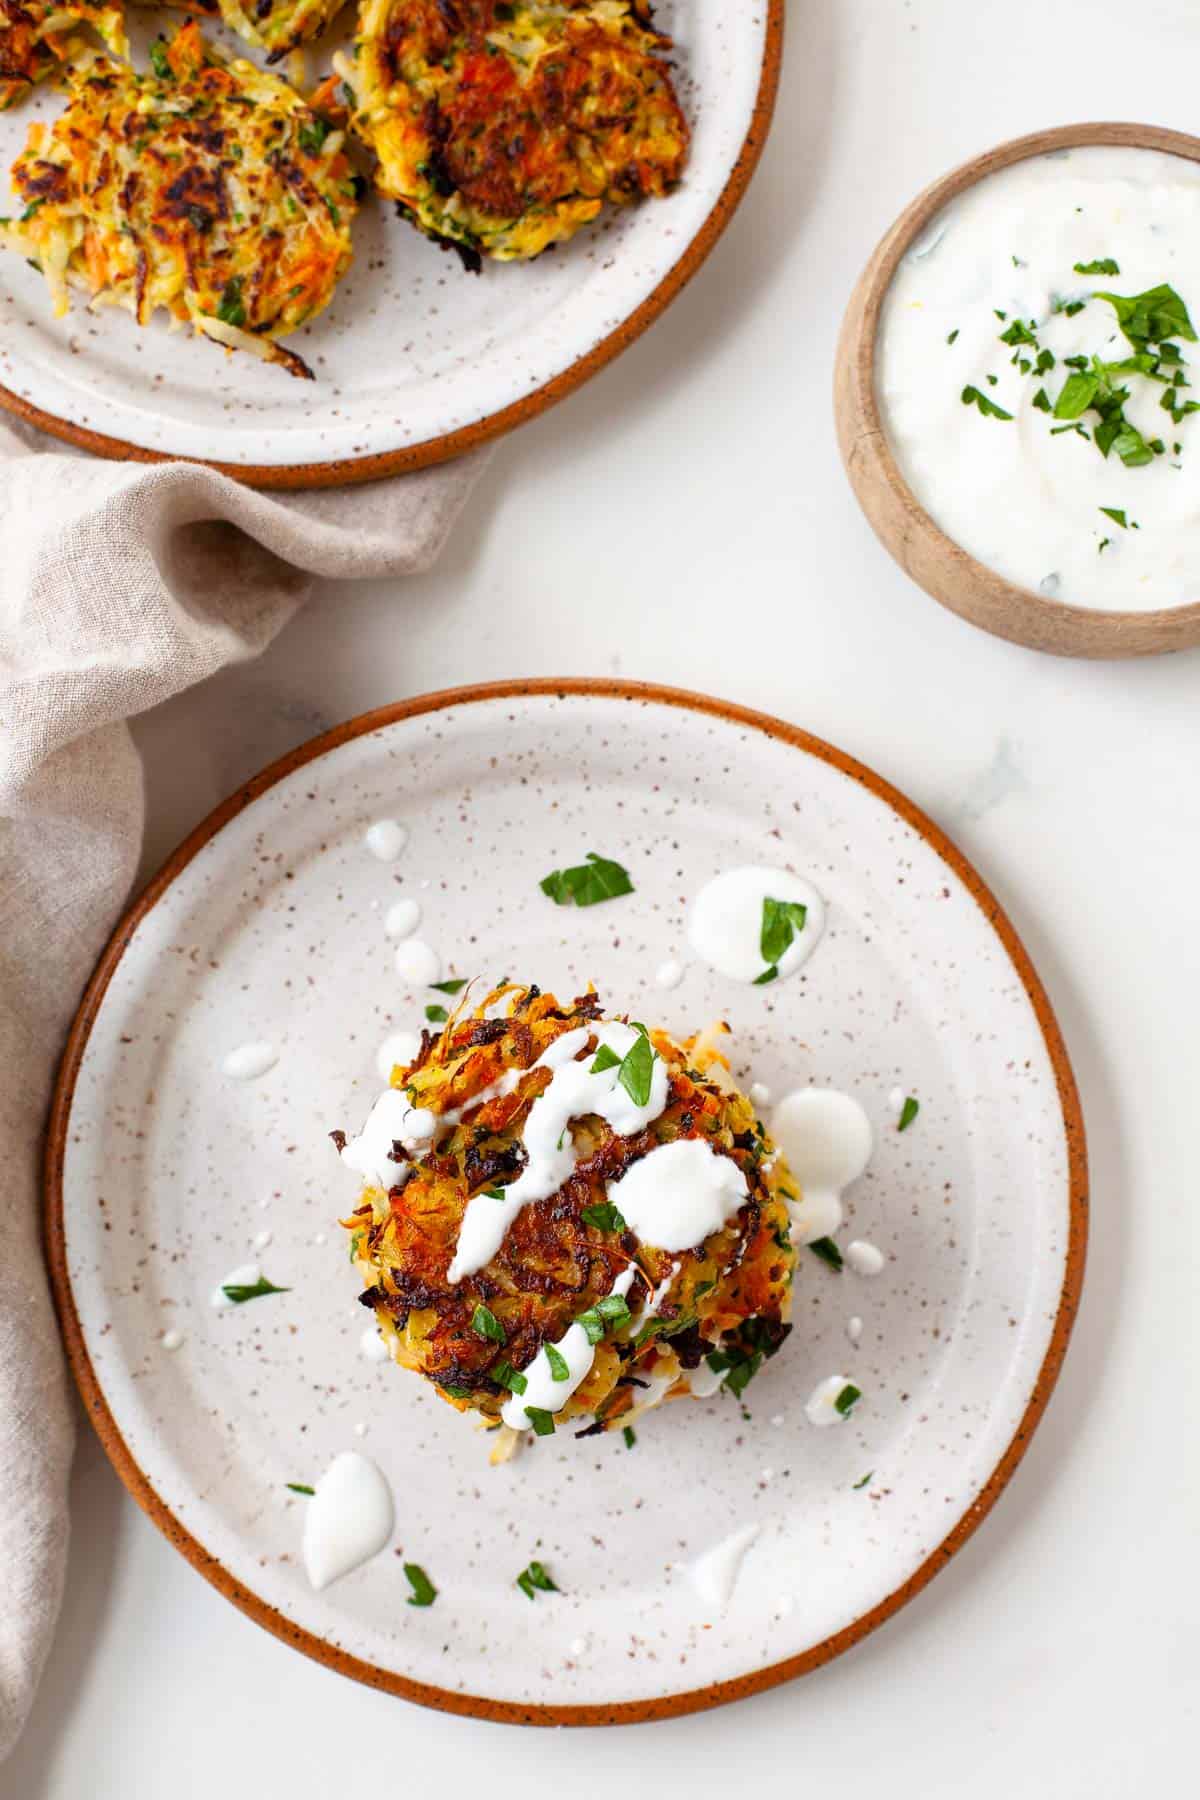 two plates of kohlrabi fritters with side of herb yogurt sauce with parsley on top